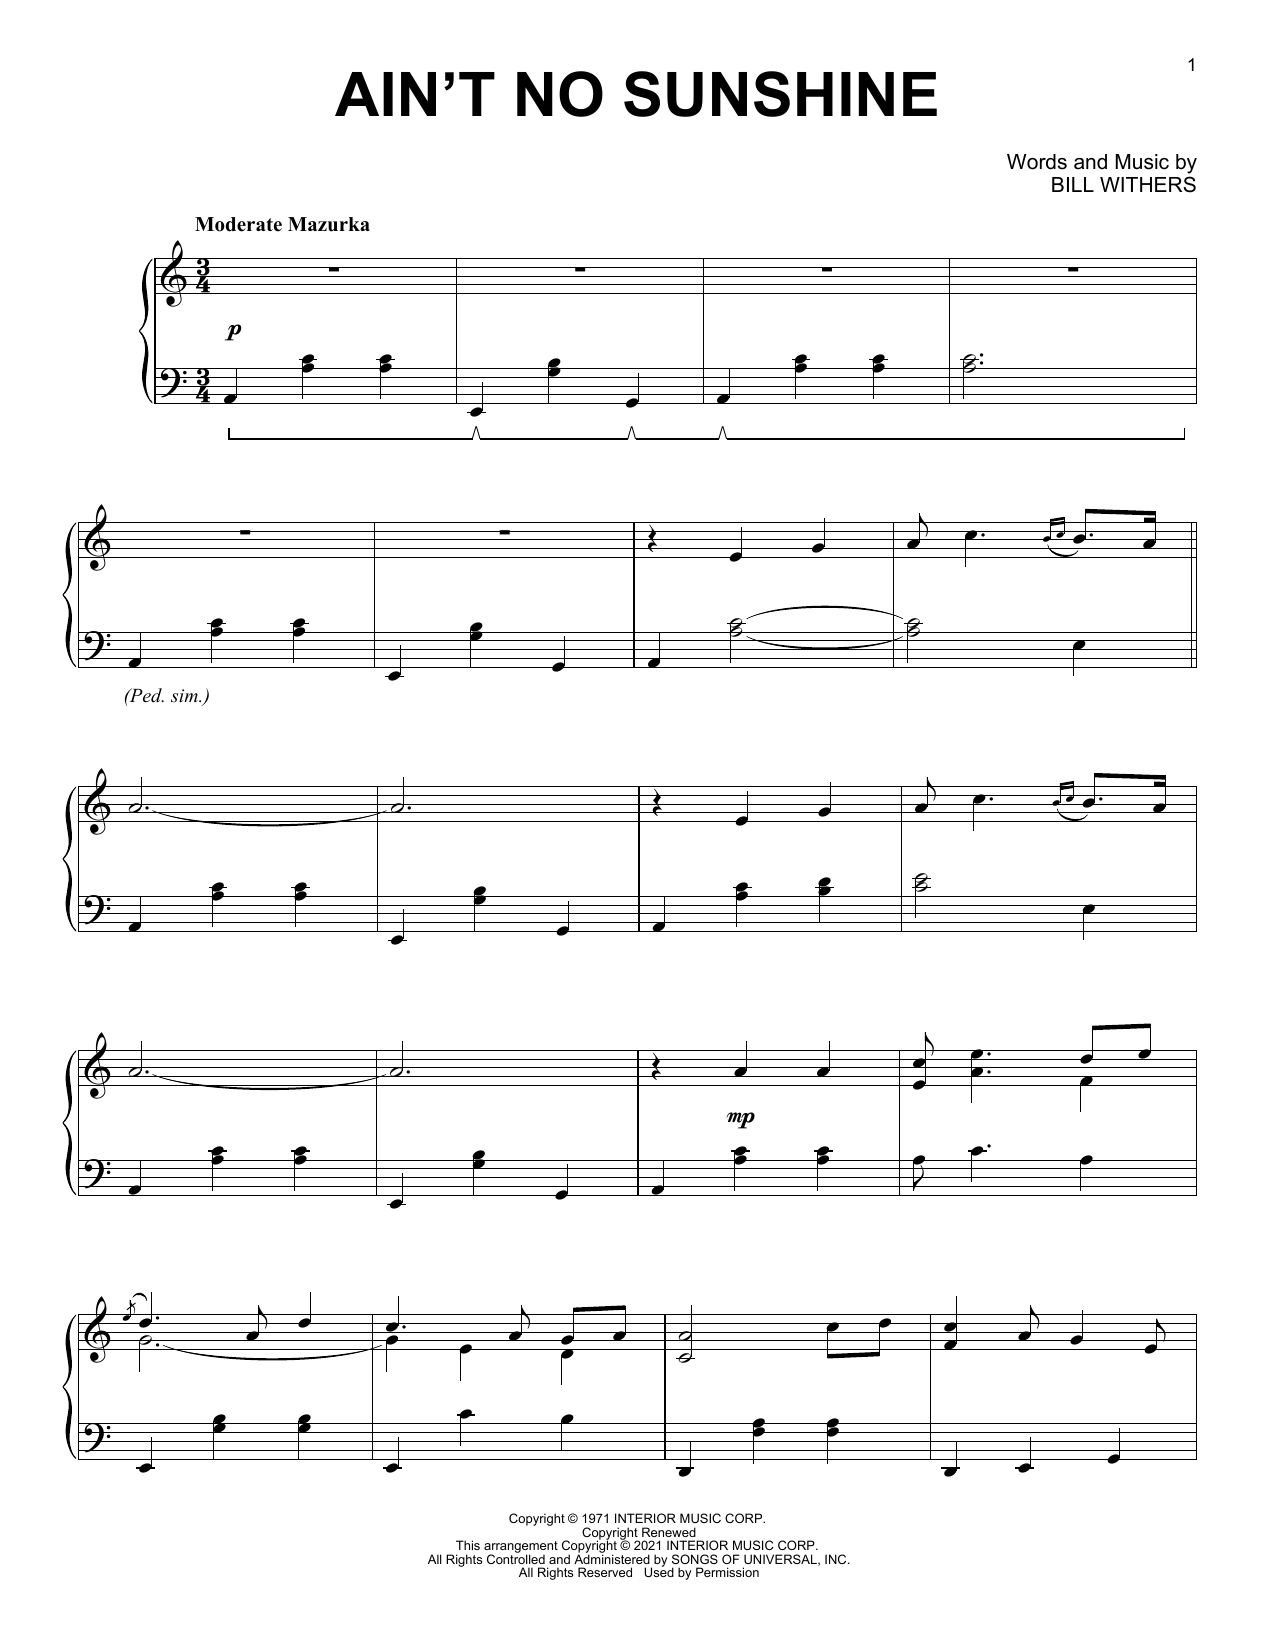 Download Bill Withers Ain't No Sunshine [Classical version] Sheet Music